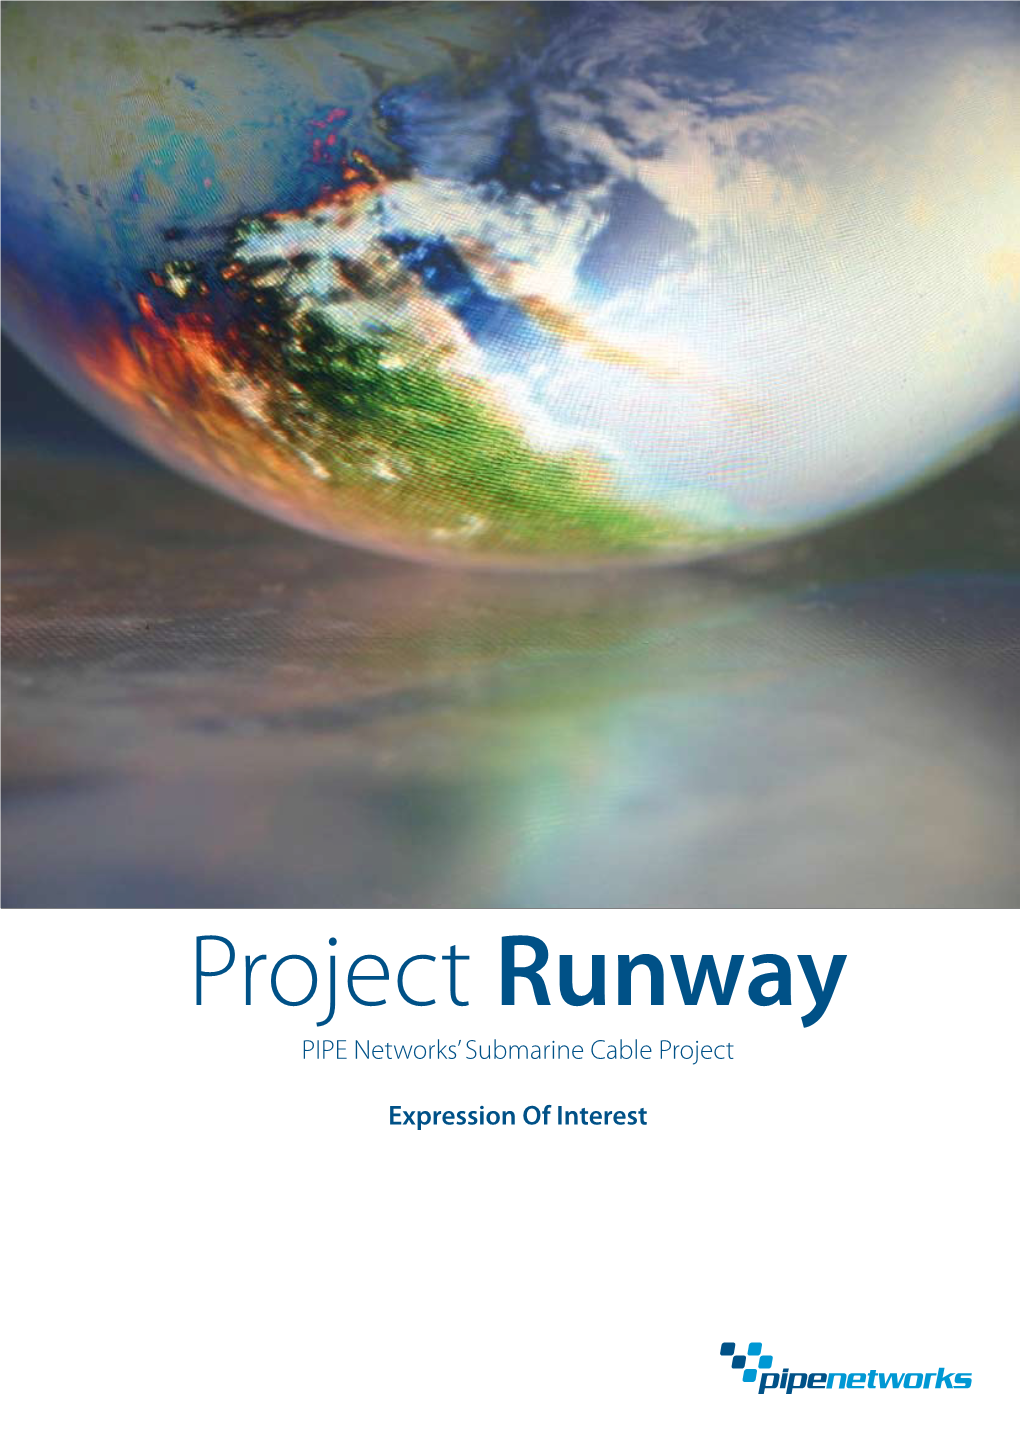 Project Runway PIPE Networks’ Submarine Cable Project